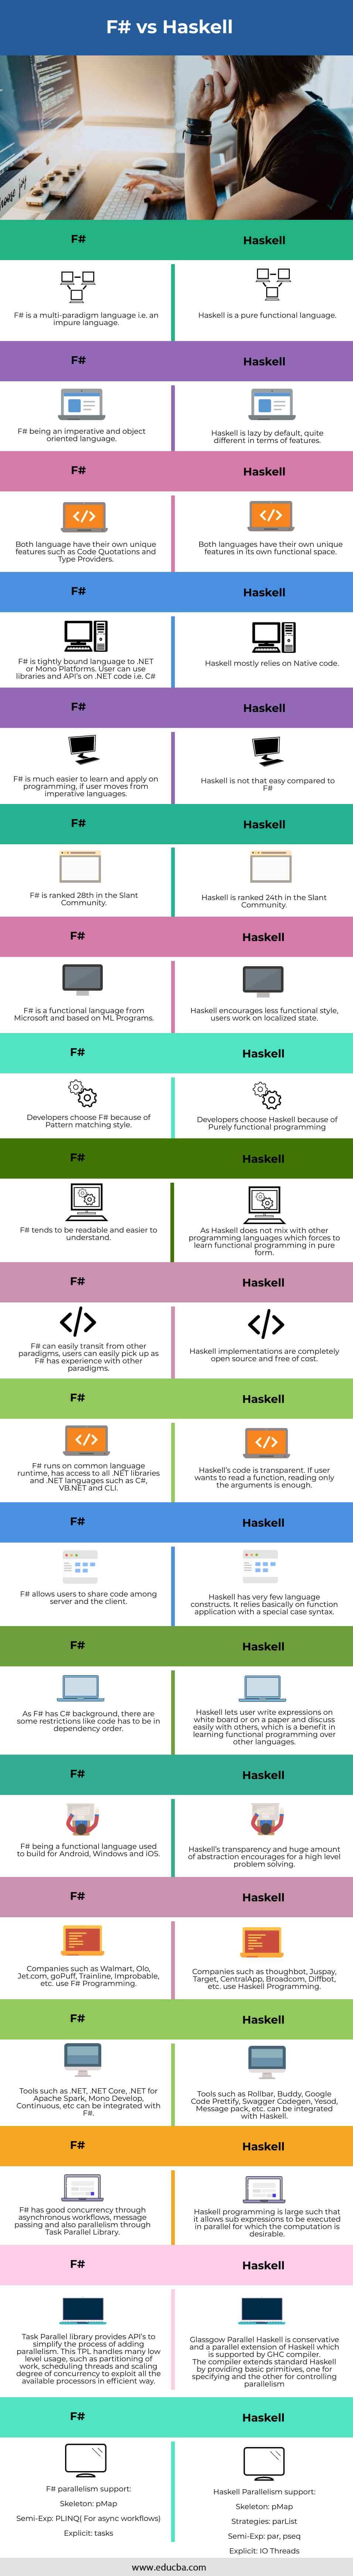 F#-vs-Haskell-info